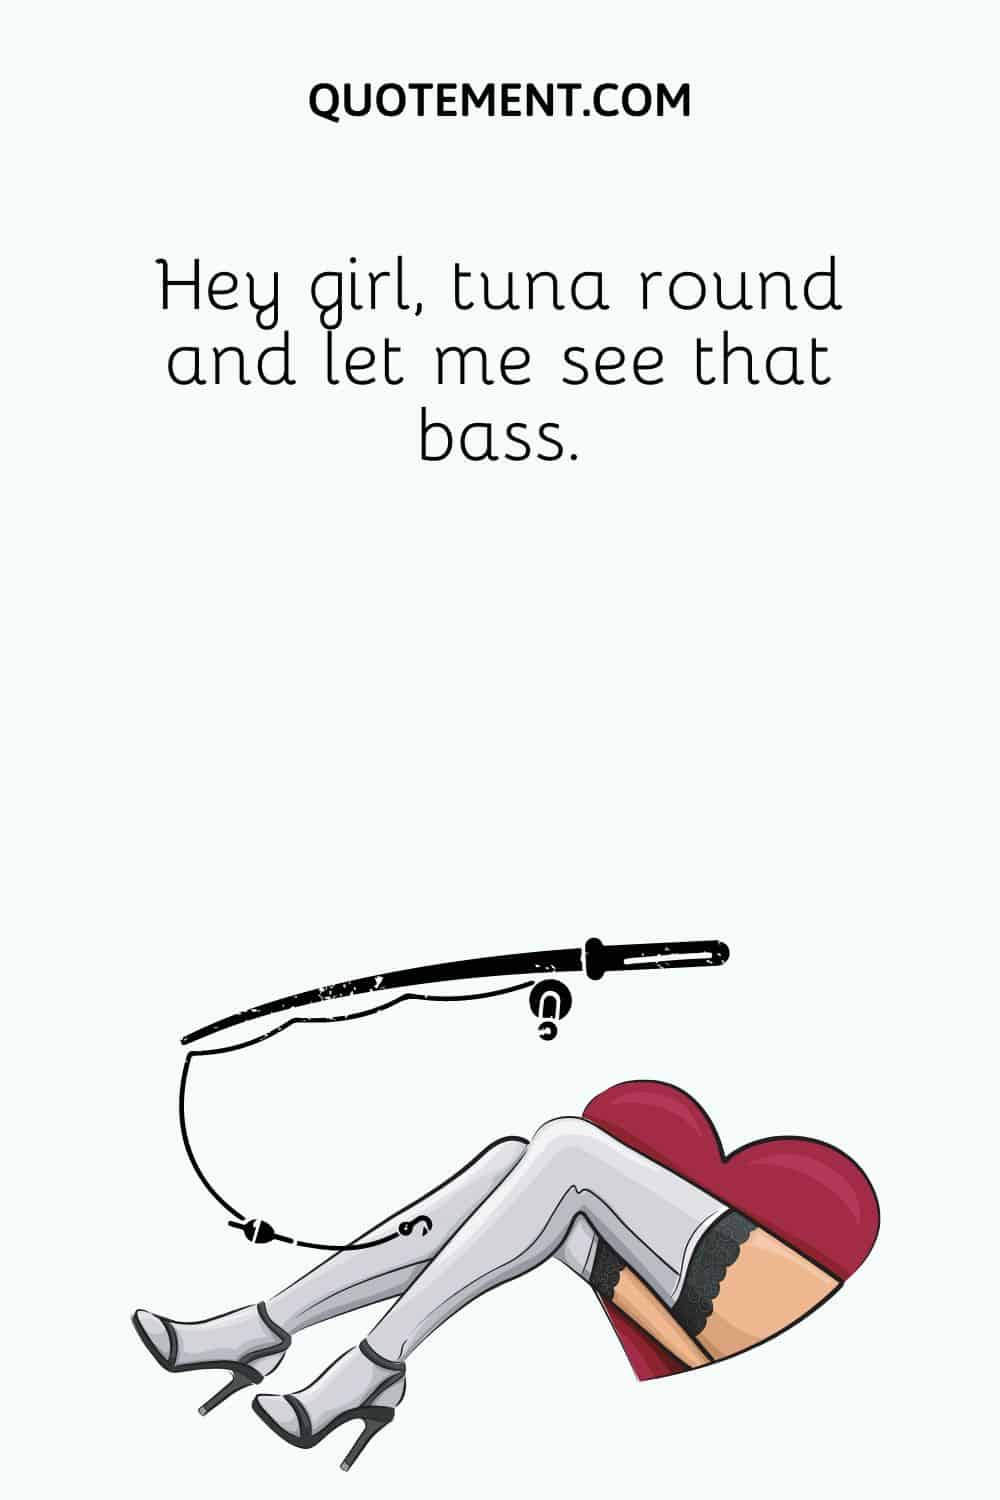 Hey girl, tuna round and let me see that bass